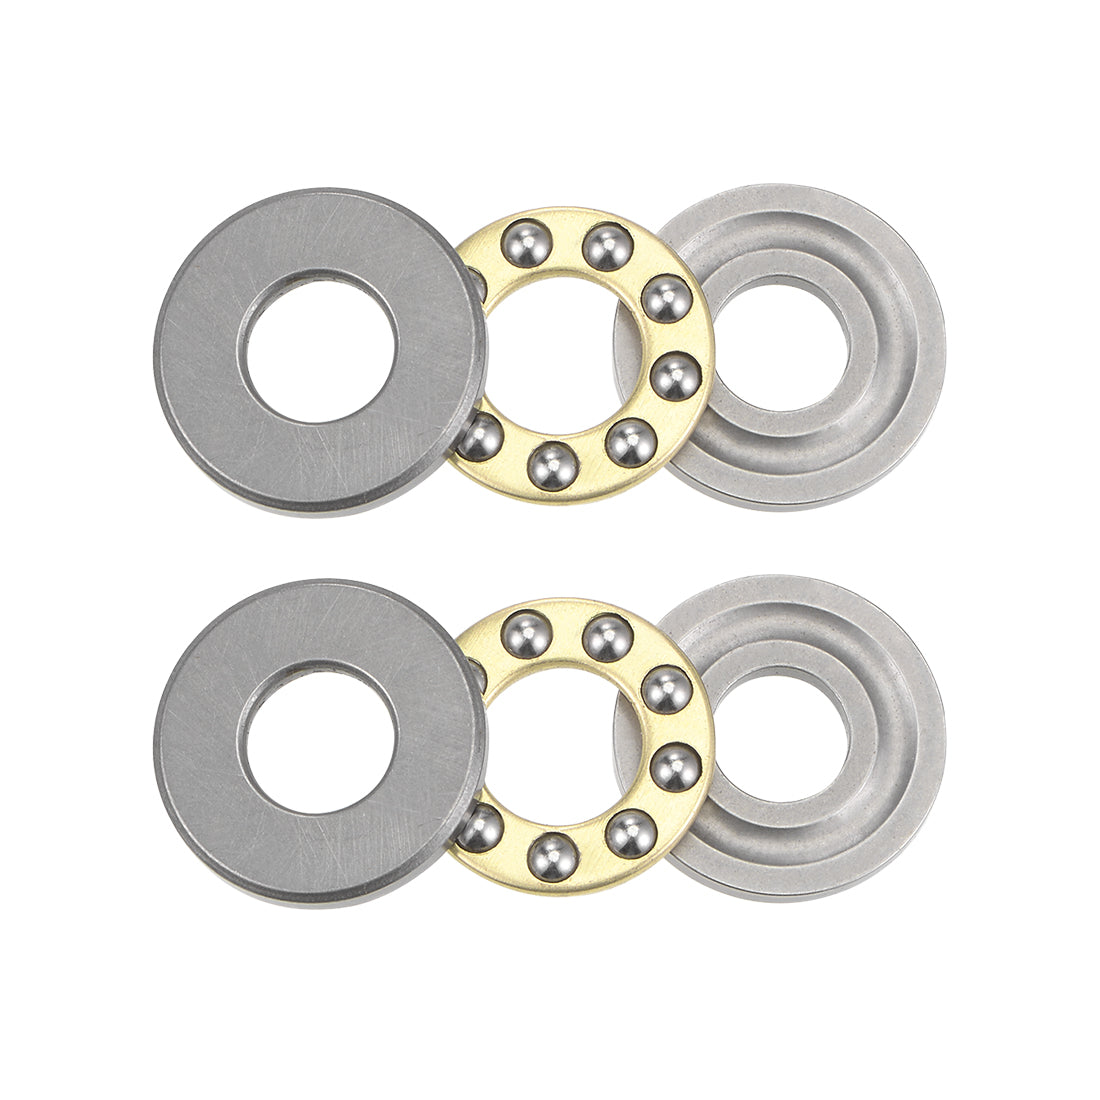 uxcell Uxcell F7-17M Miniature Thrust Ball Bearing 7x17x6mm Chrome Steel with Washer 2Pcs